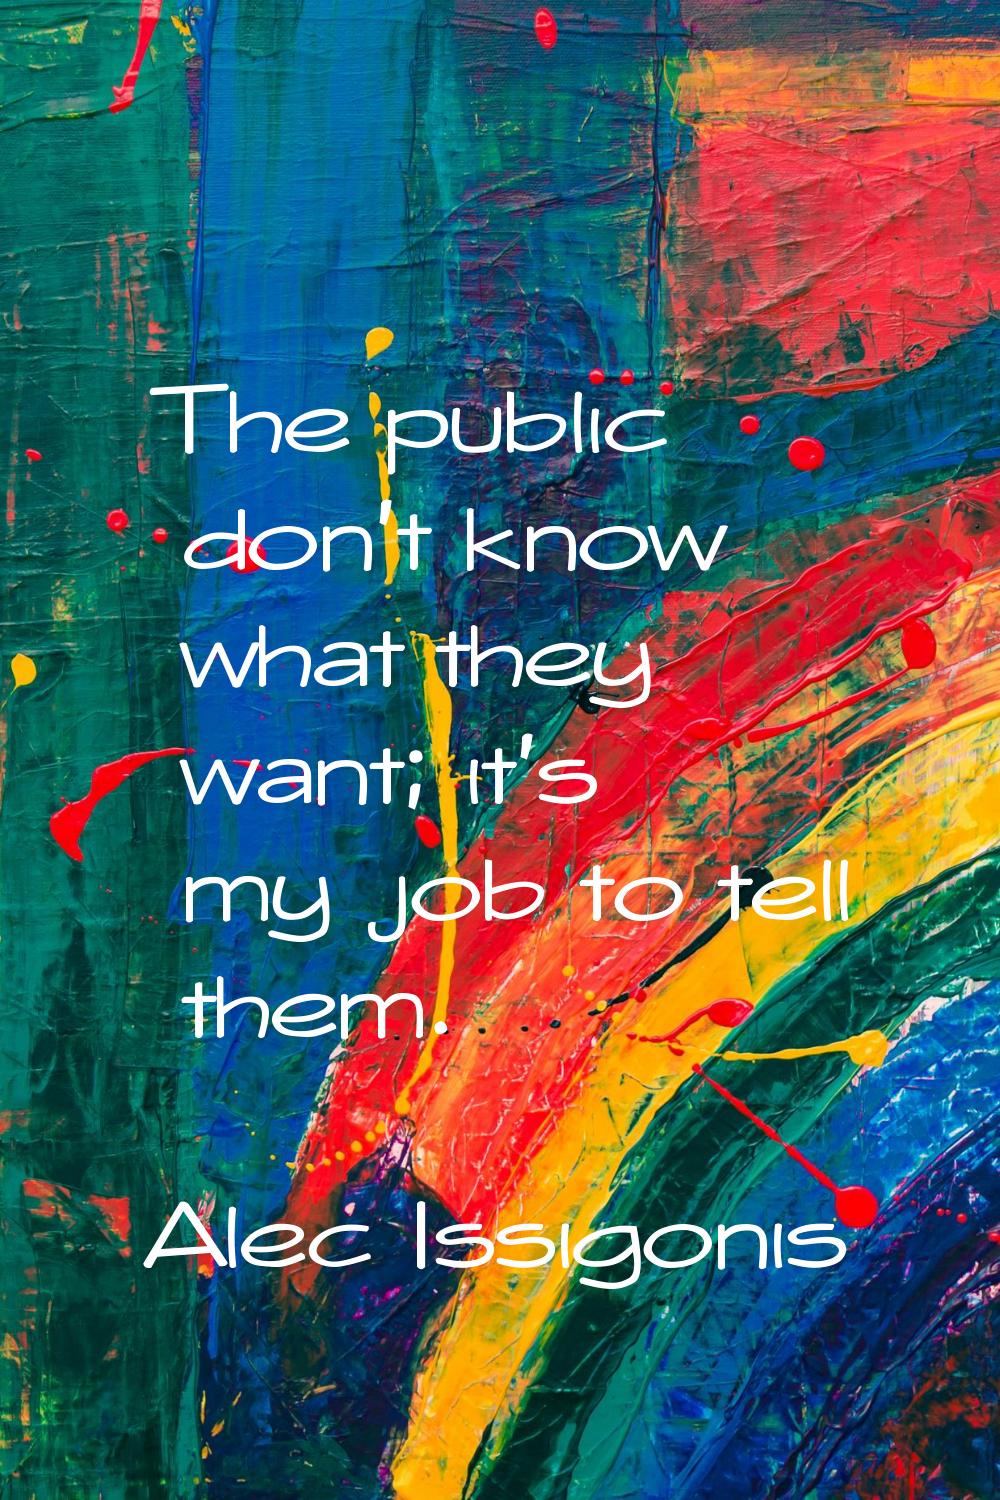 The public don't know what they want; it's my job to tell them.